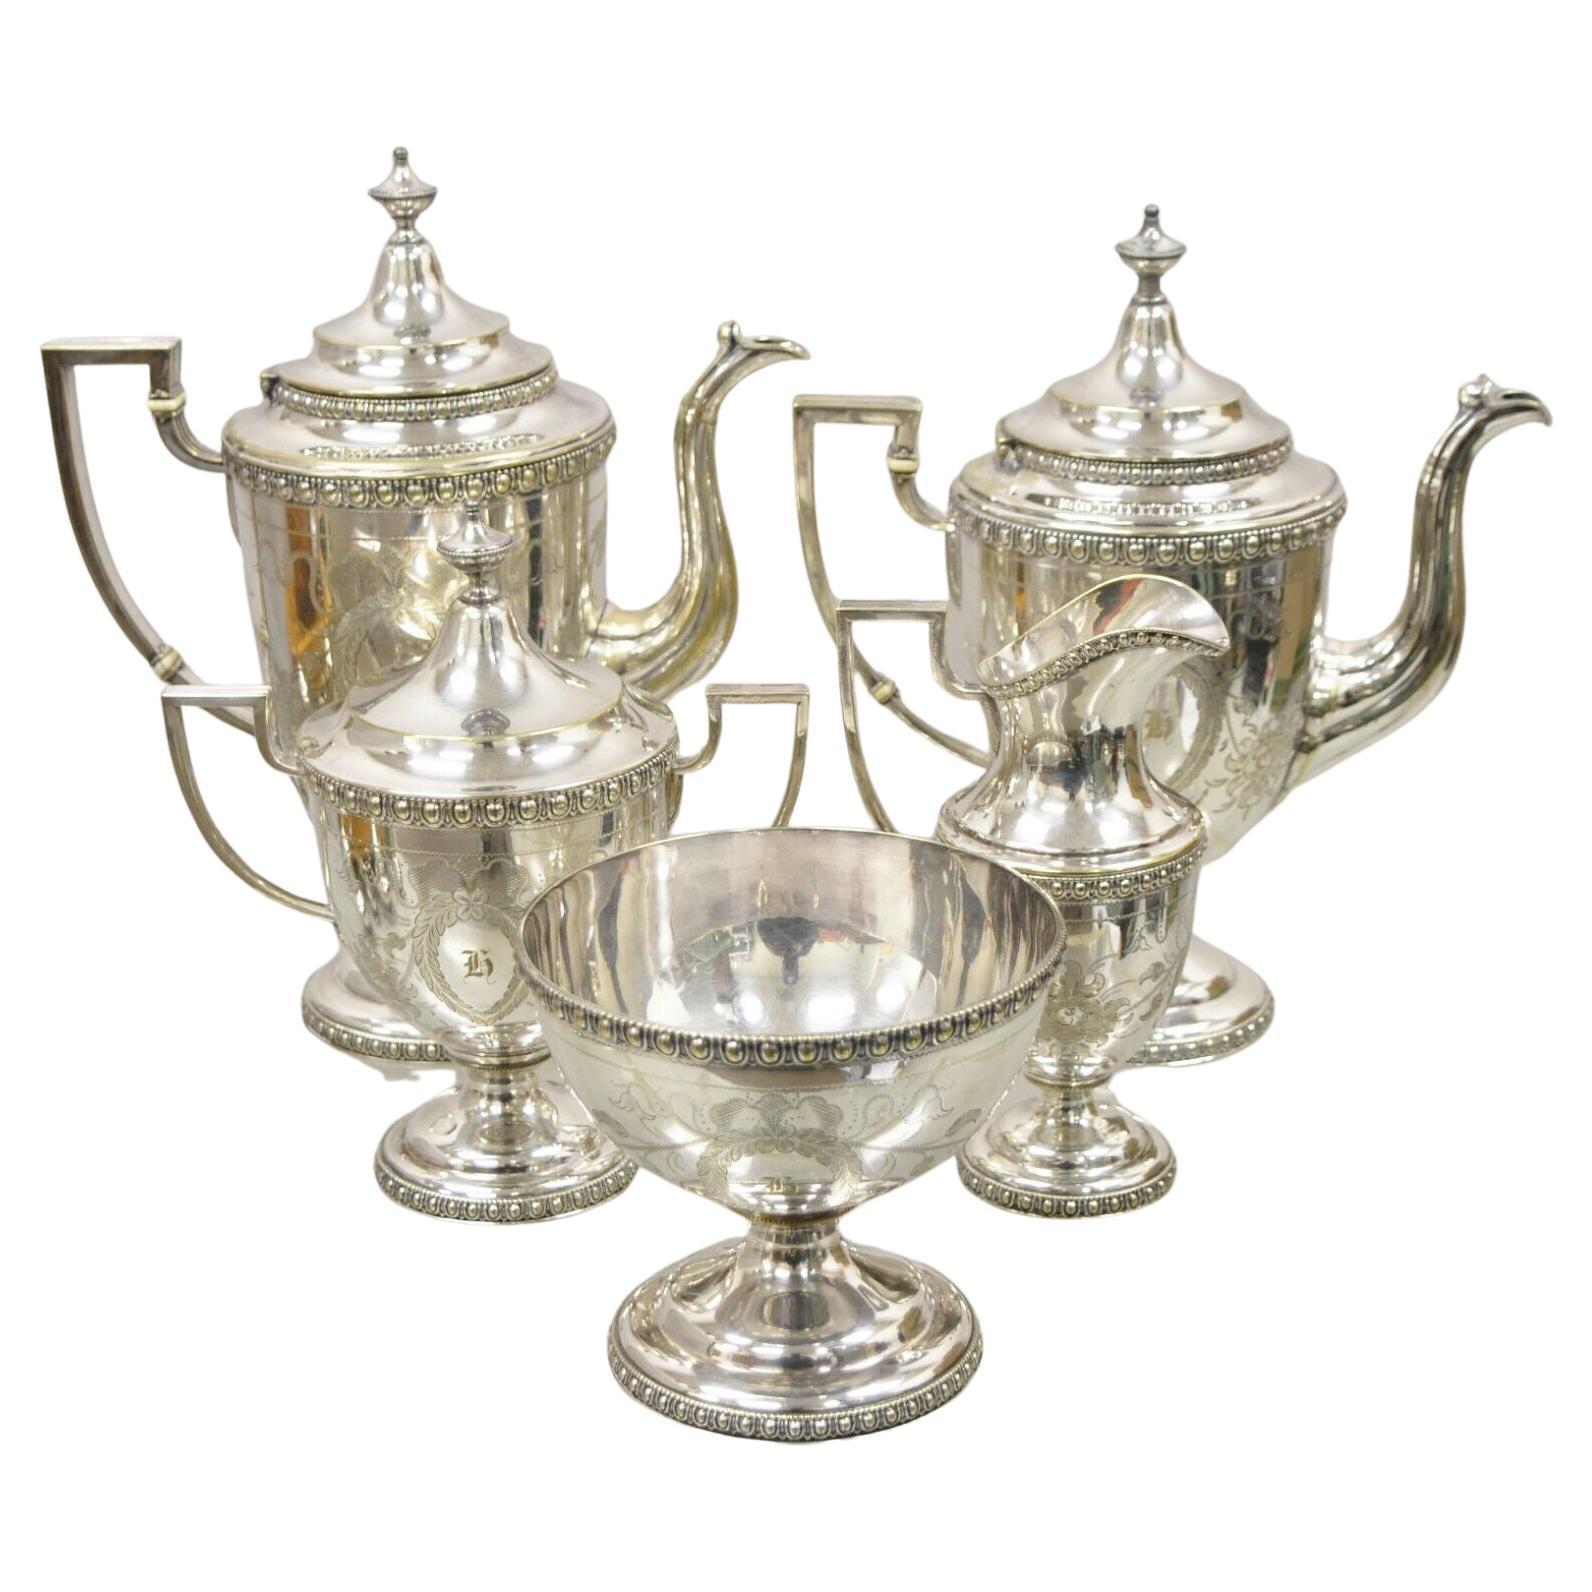 Antique Manhattan Plate Co. Silver Plated "July 4th 1861" Tea Set, 5 Pc Set For Sale